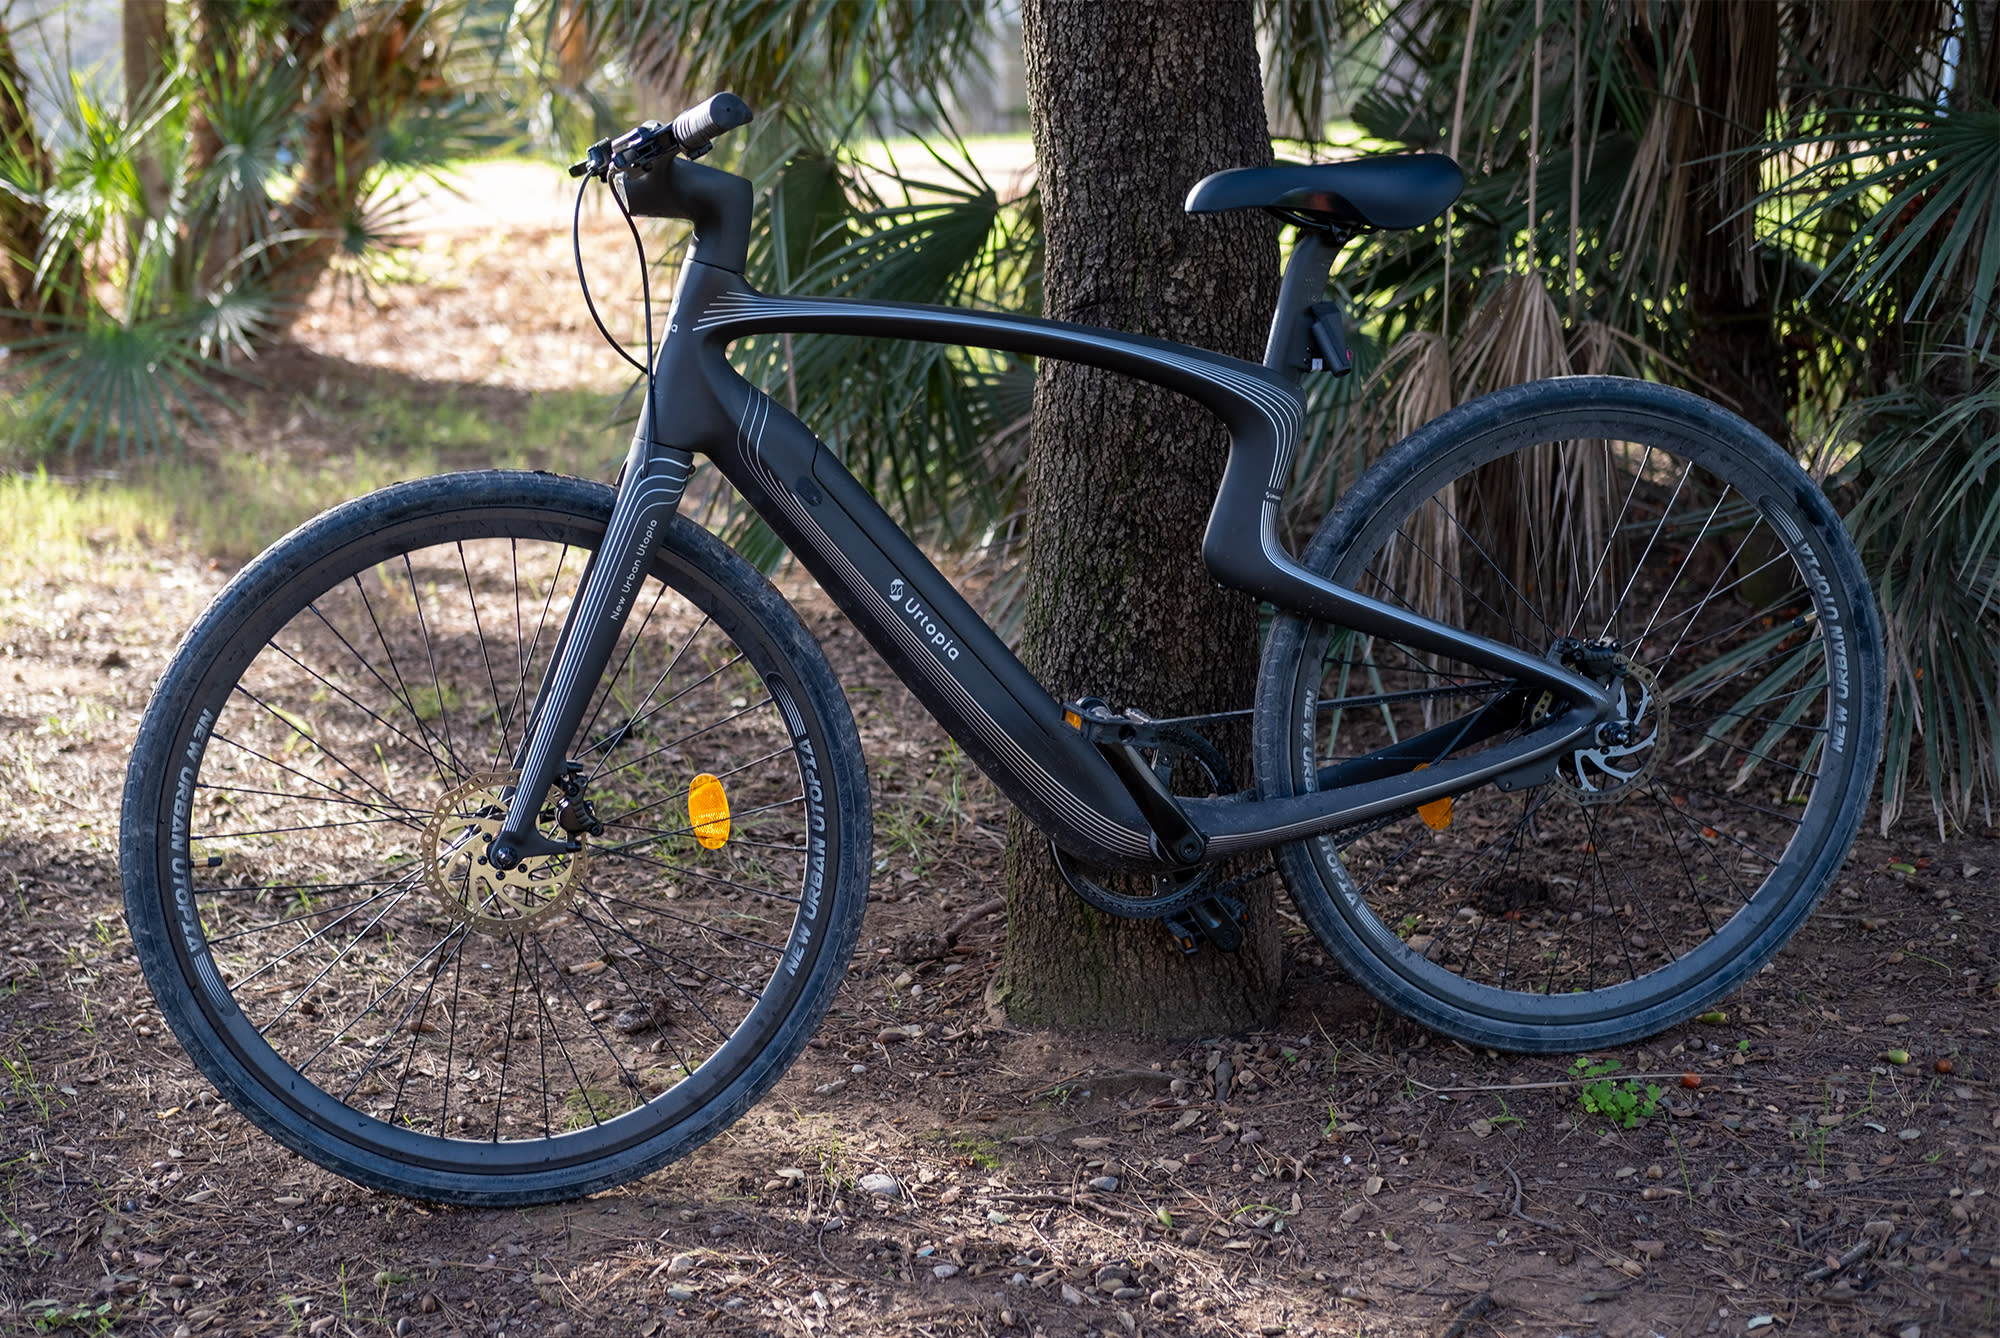 Urtopia's distinctive ebike is pictured resting against a tree.